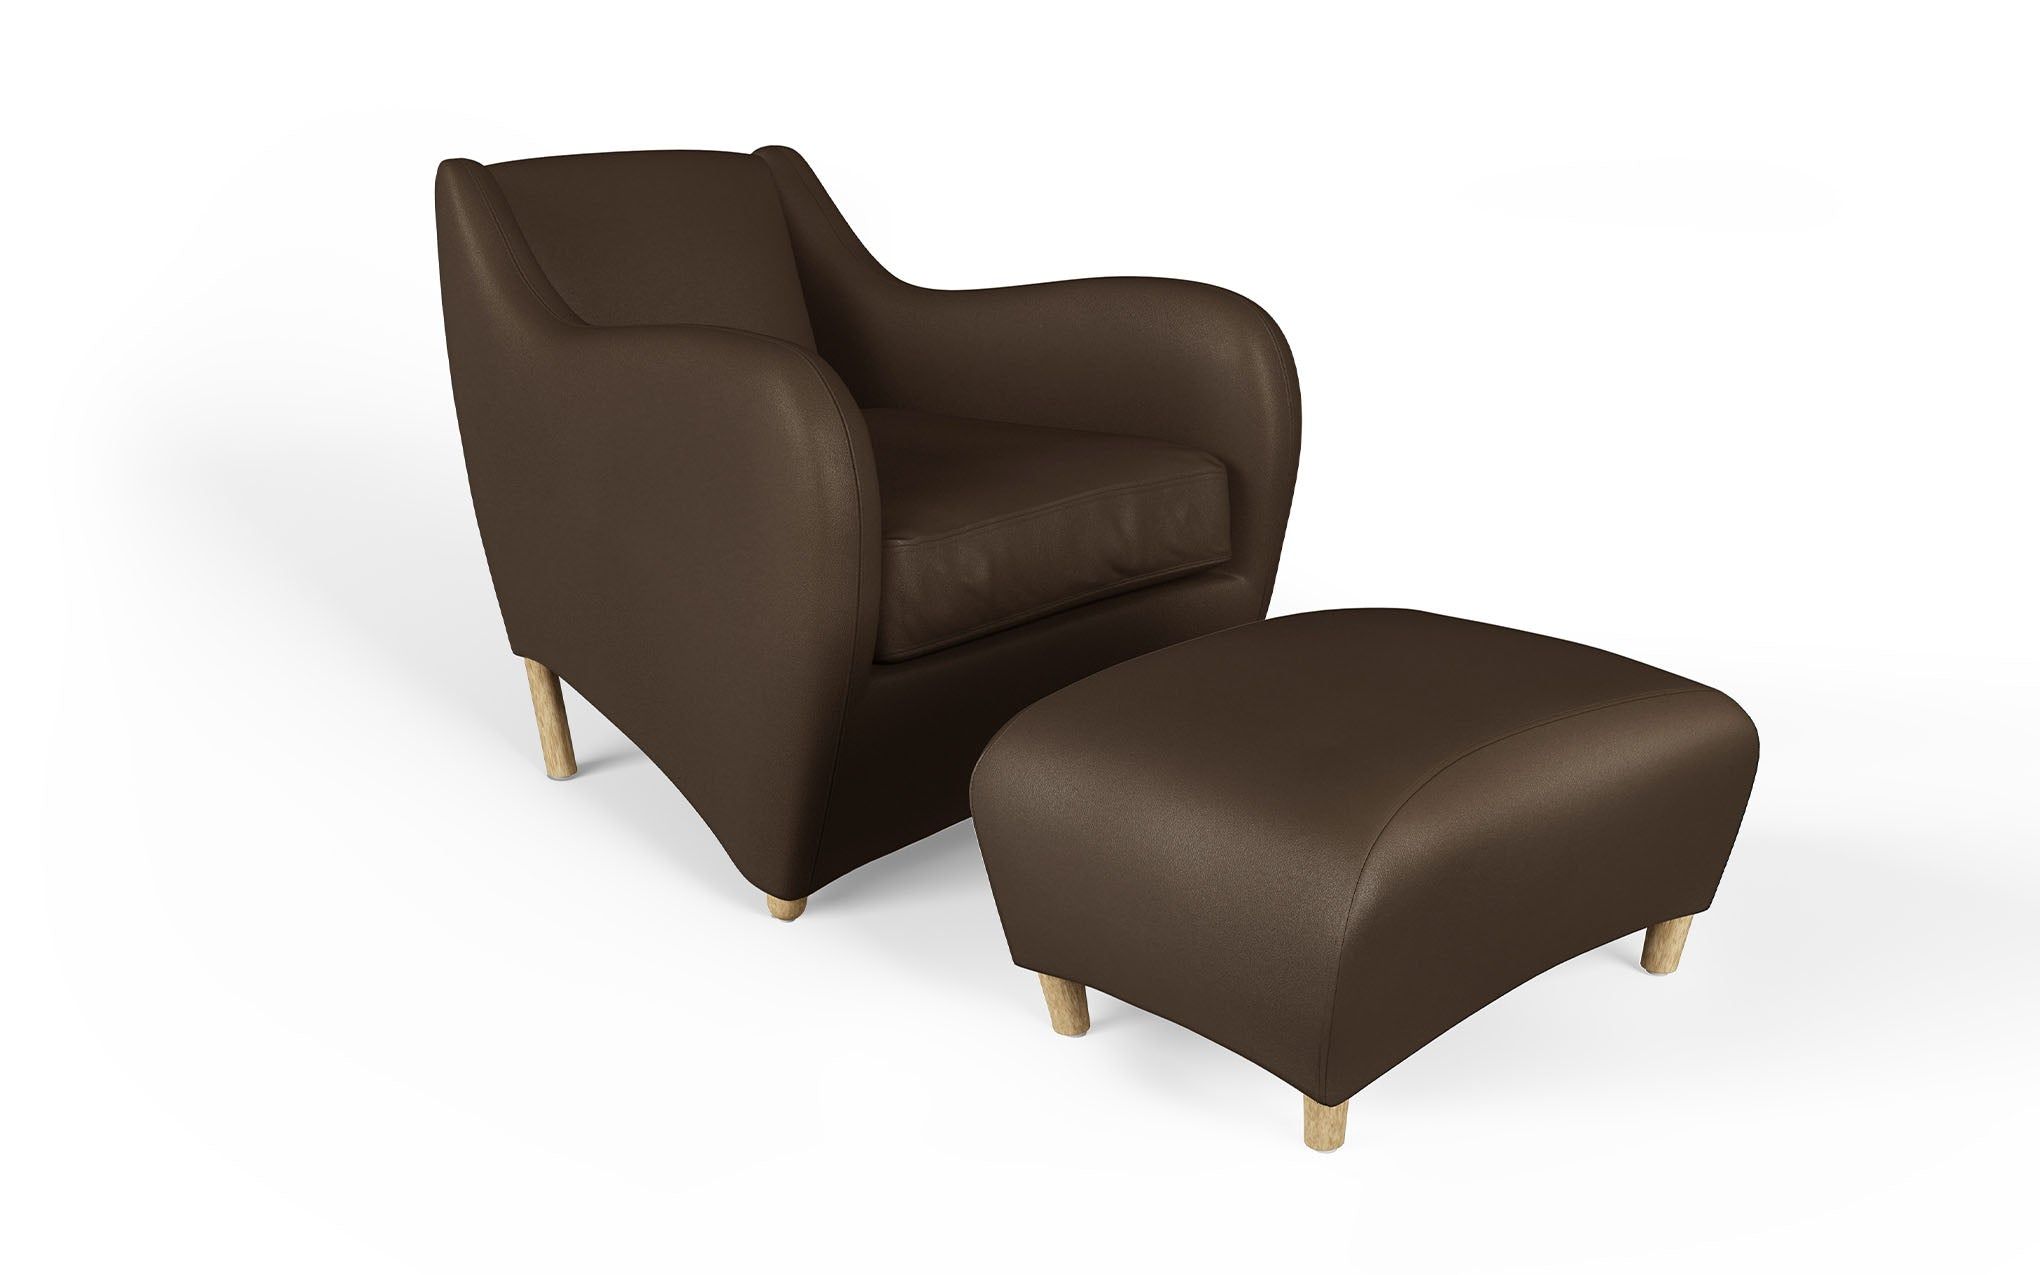 Luxurious Poise Chair Elevate Your Space with an Elegant Poise Chair